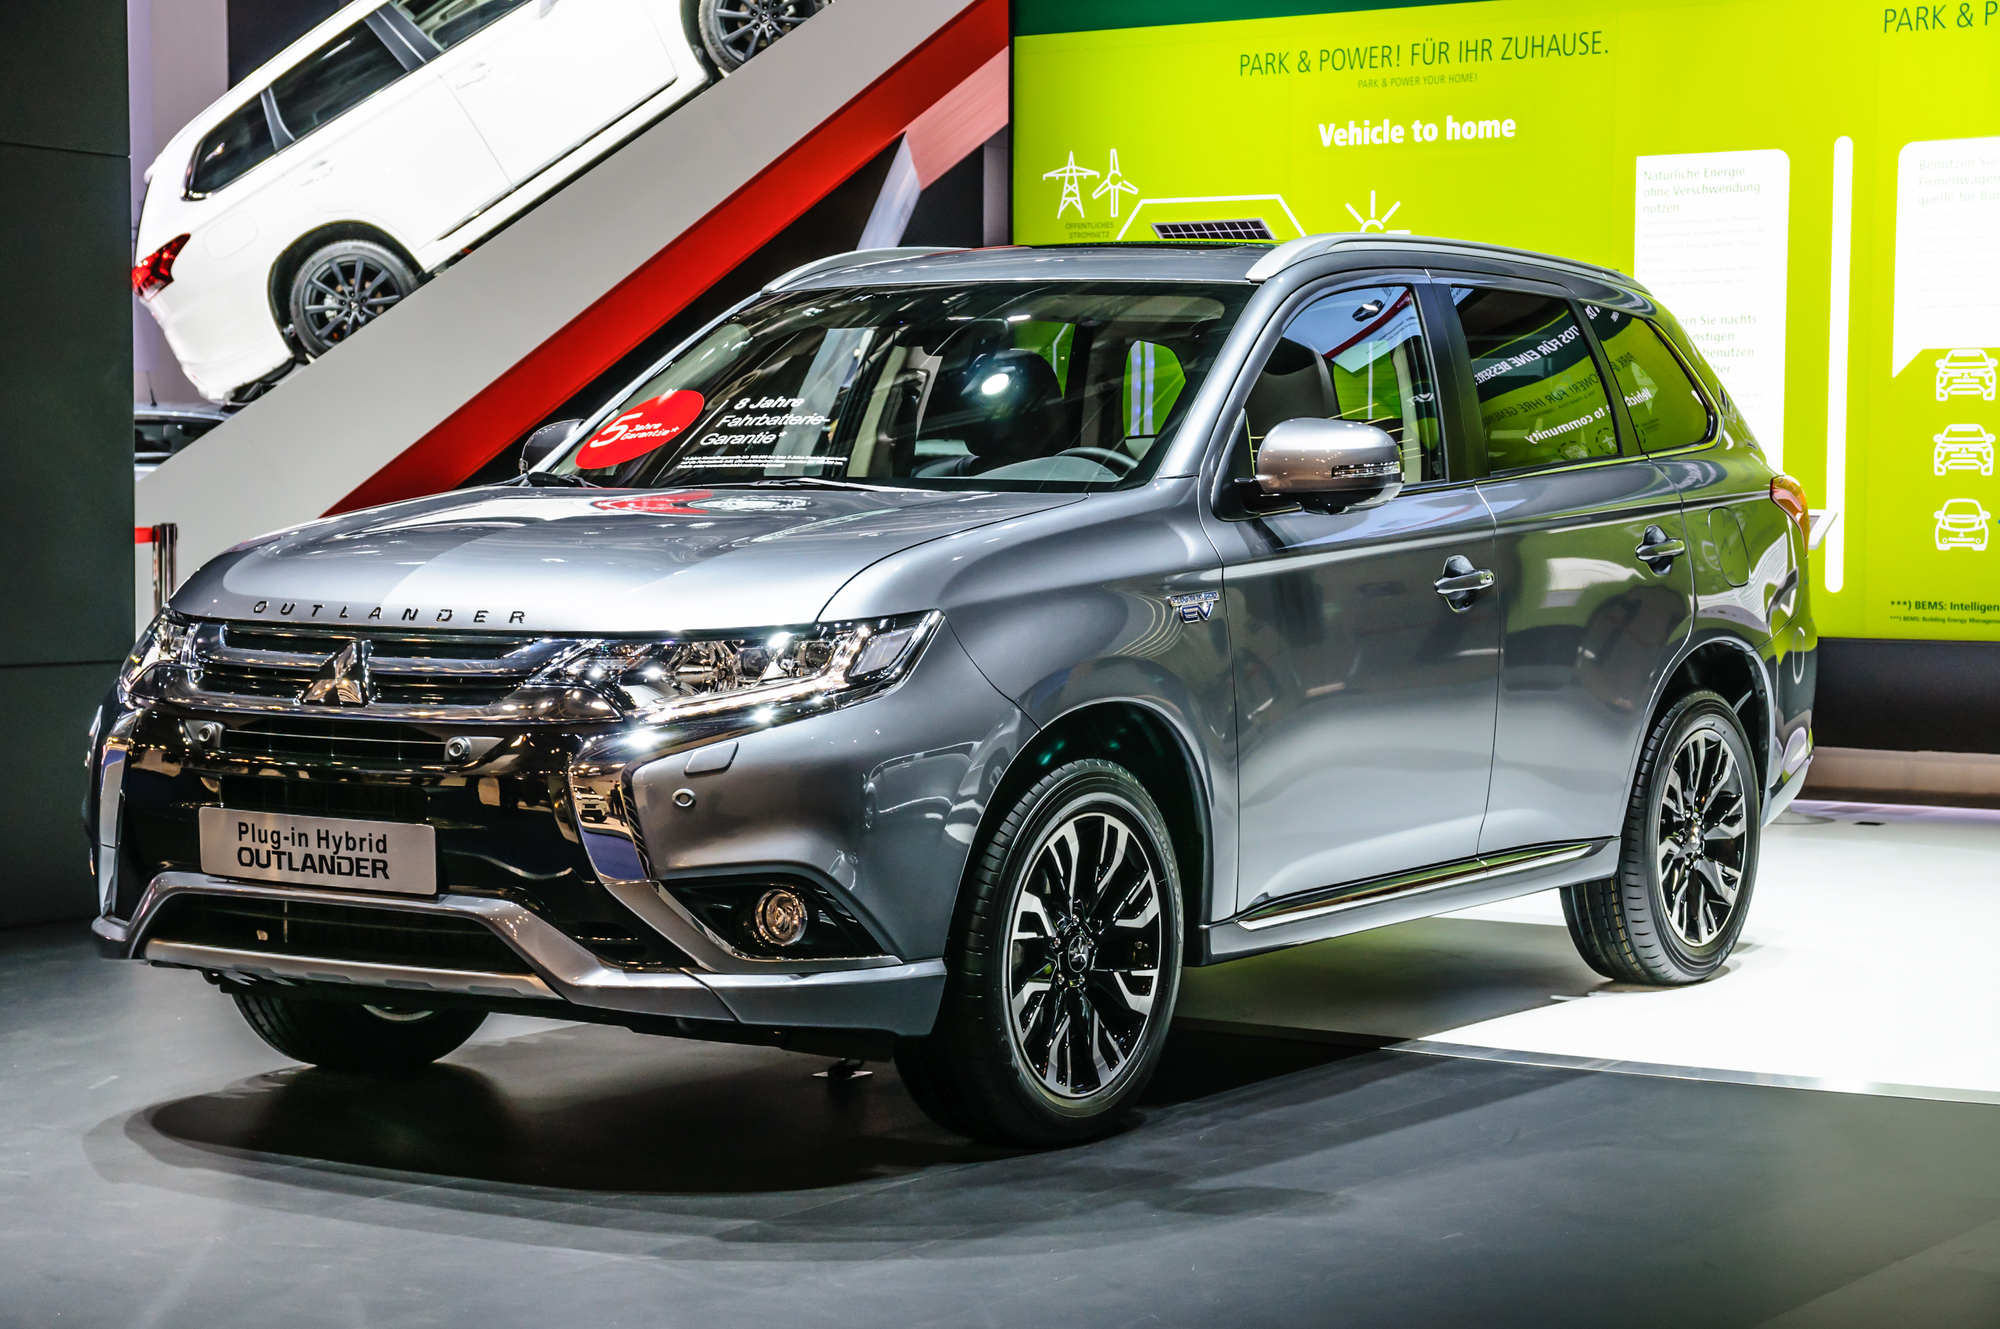 How much does a Mitsubishi Outlander weigh?